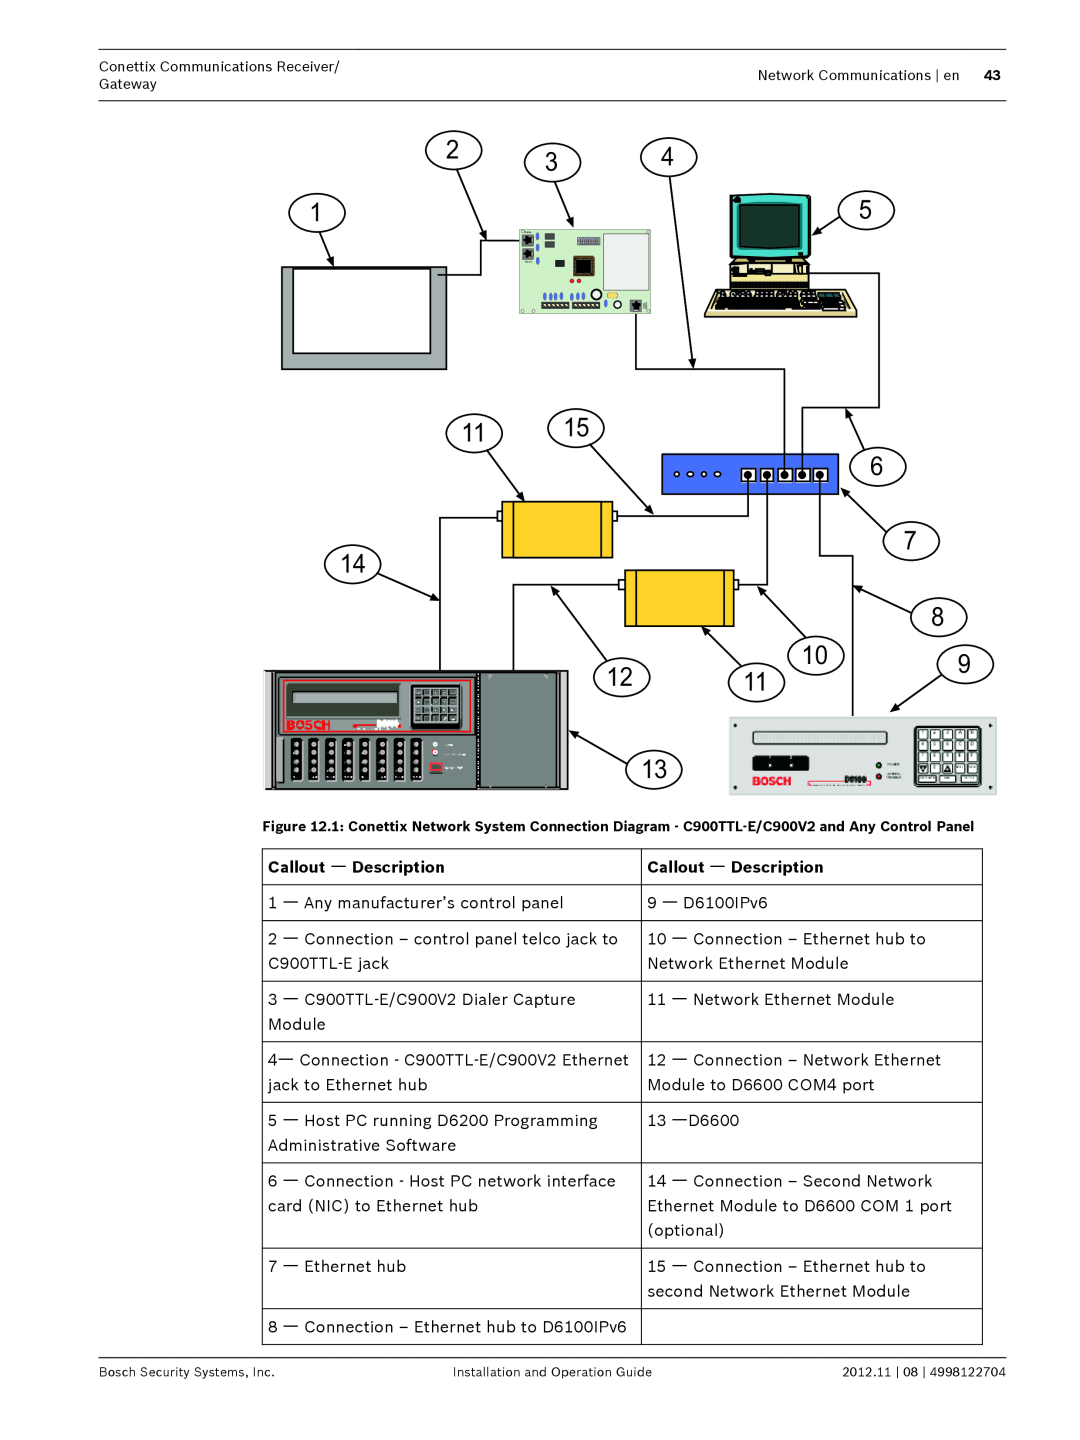 Bosch Appliances D6600 installation and operation guide 6 7, Callout ᅳ Description, ᅳ Any manufacturer’s control panel 